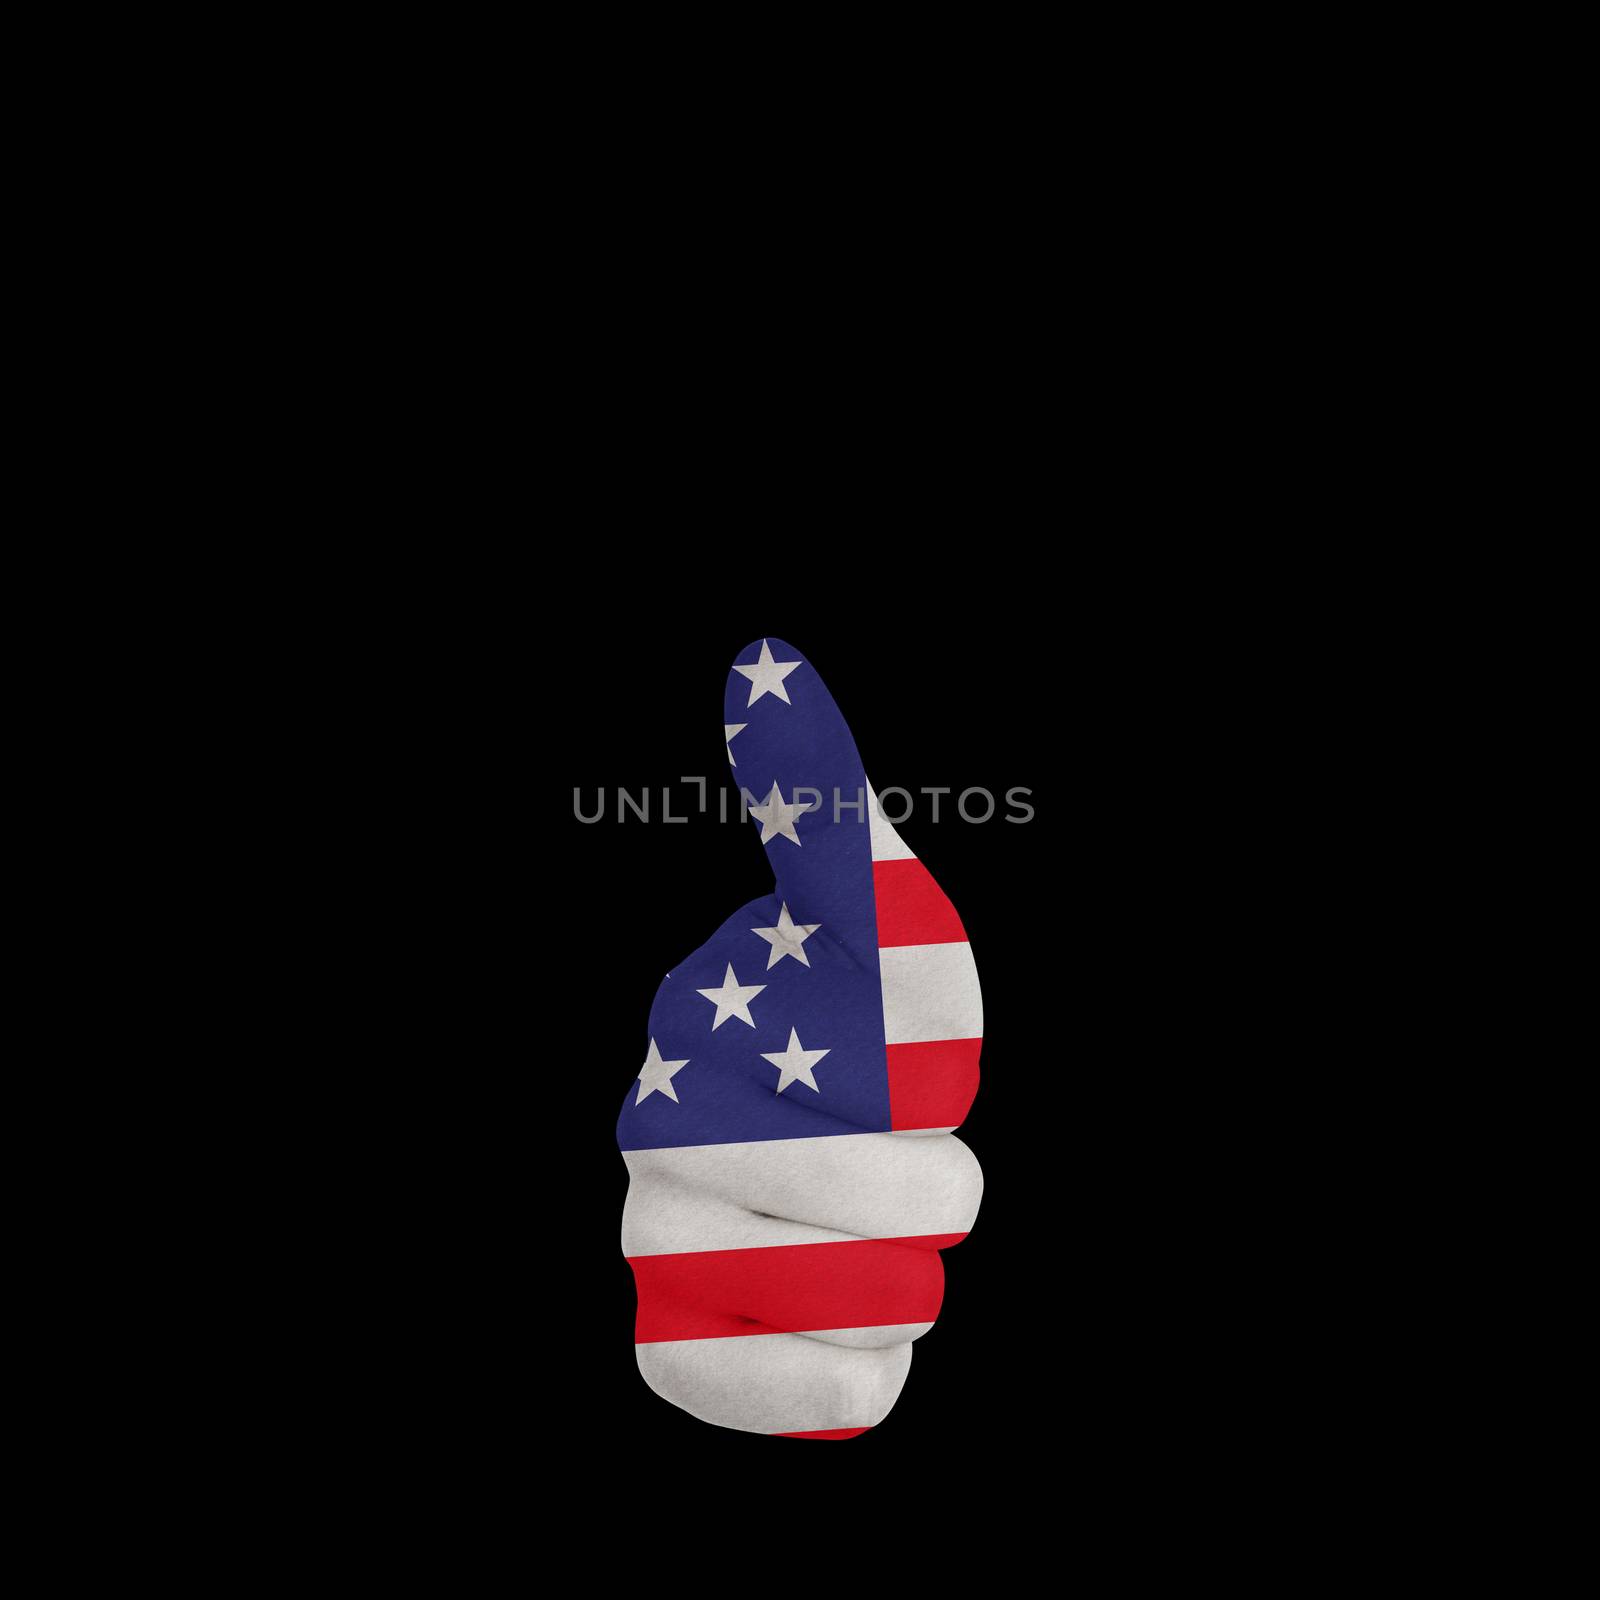 Composite image of hand showing thumbs up by Wavebreakmedia